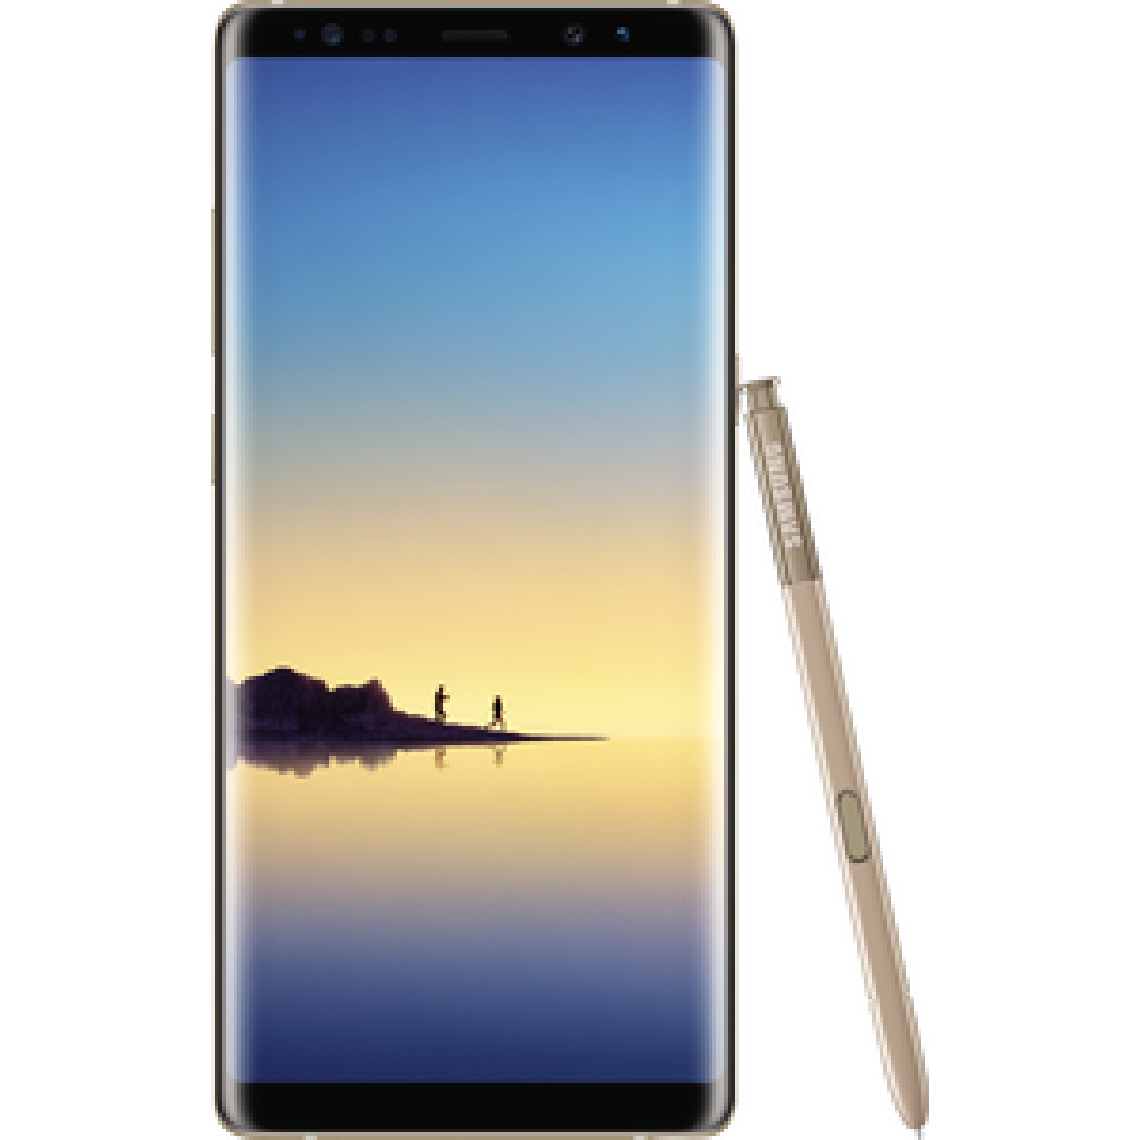 Samsung - Samsung N950F Galaxy Note8 (Maple Gold) - Smartphone Android